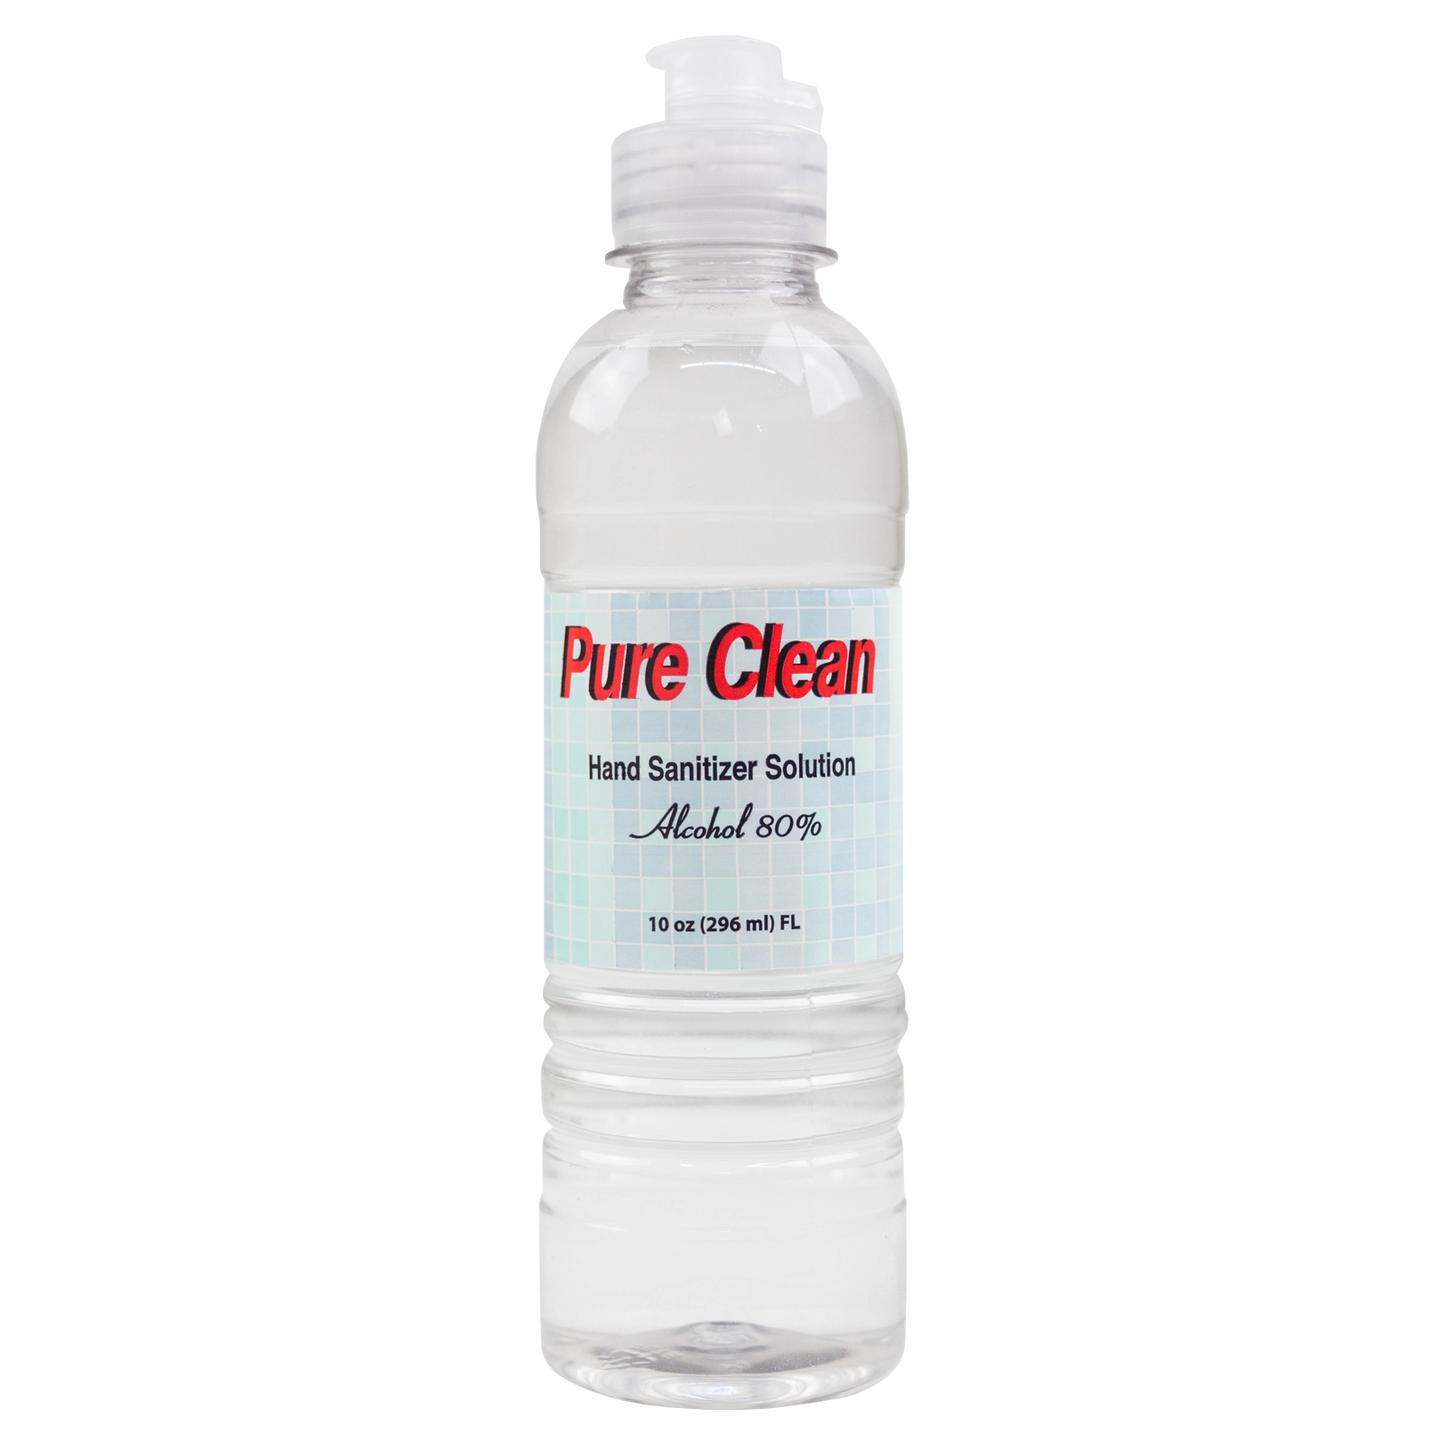 Pure Clean Hand Sanitizer Solution